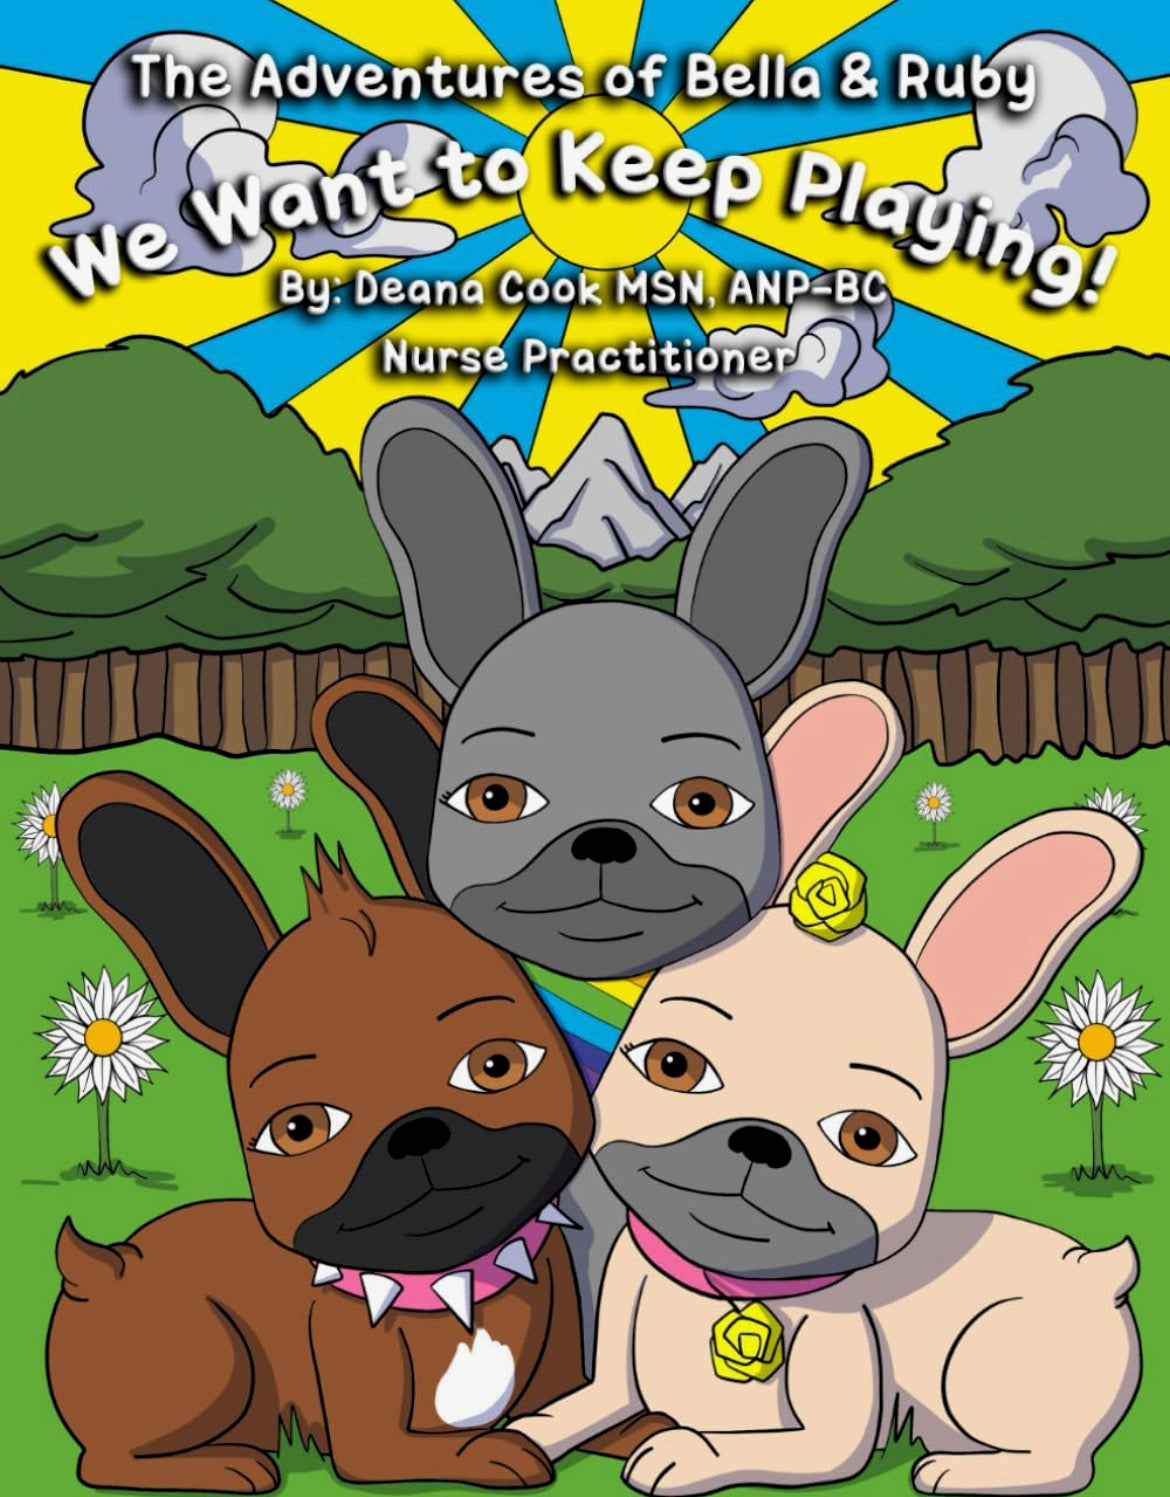 We Want to Keep Playing! Children's Book (hardback)